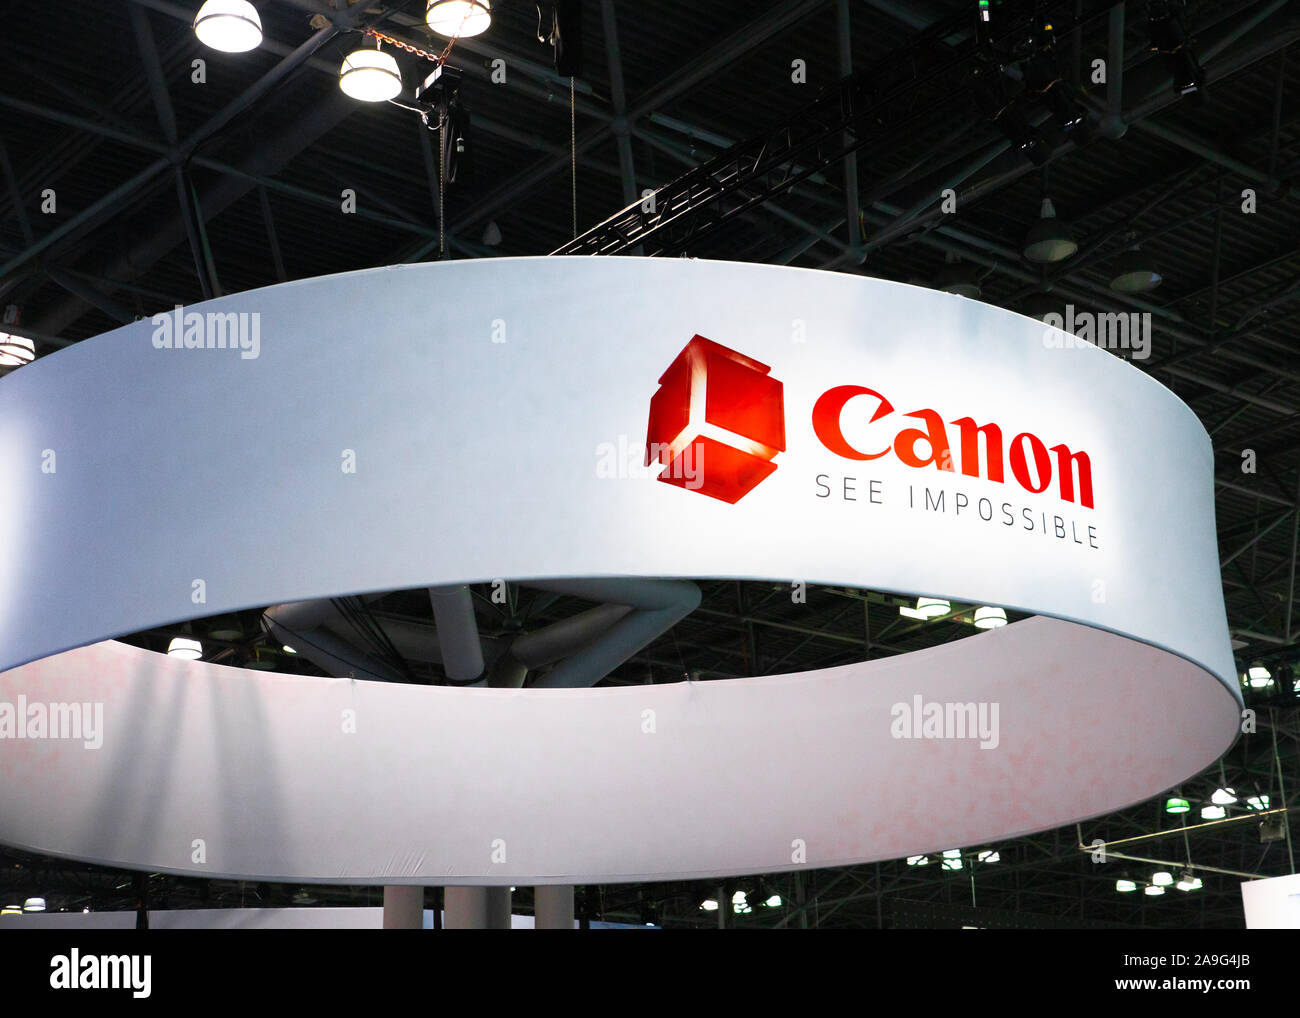 NEW YORK CITY - OCTOBER 24, 2019:  View of the Canon Camera display at the 2019 PhotoPlus Expo in New York City, Stock Photo